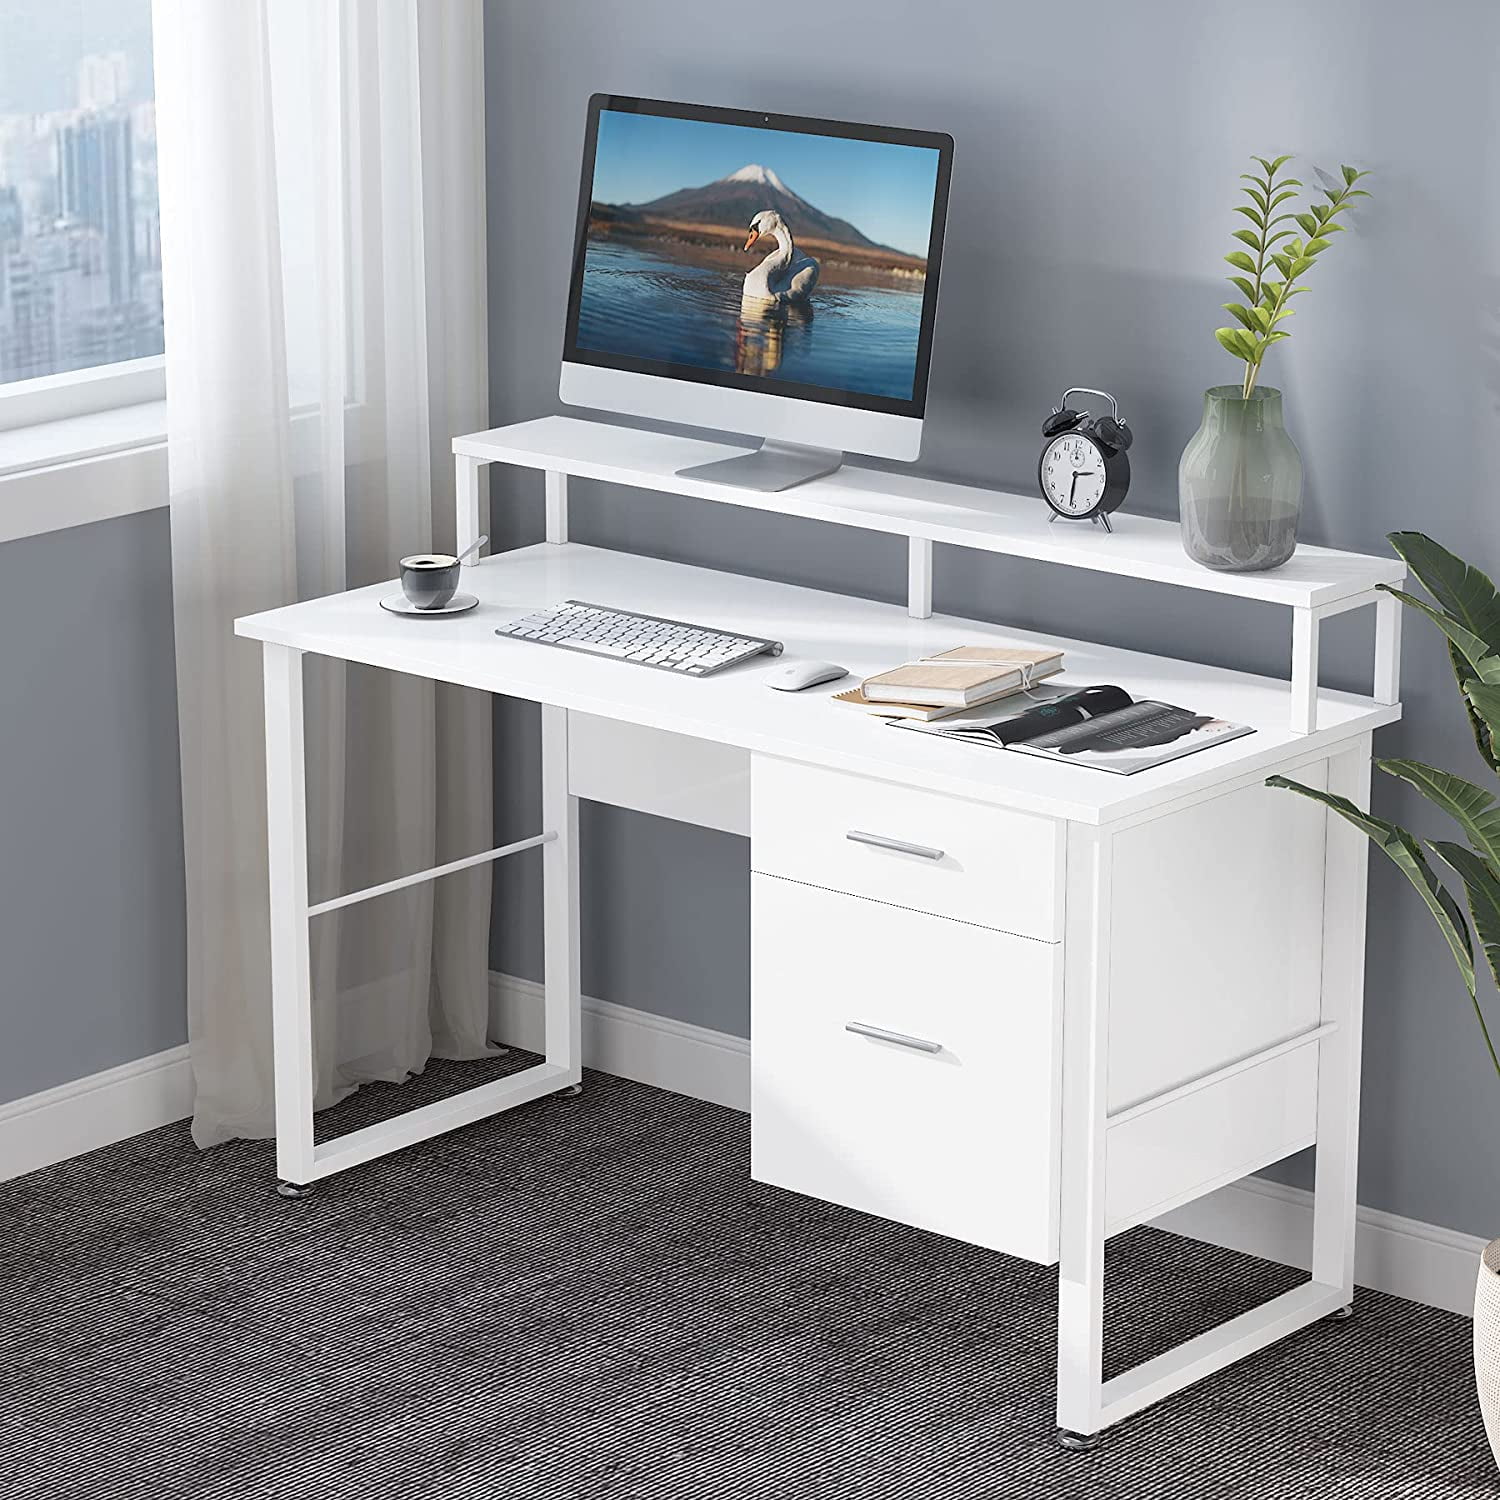 Details about   Computer Desk w/Drawers PC Laptop Table Bookshelf Study Workstation Home Office 